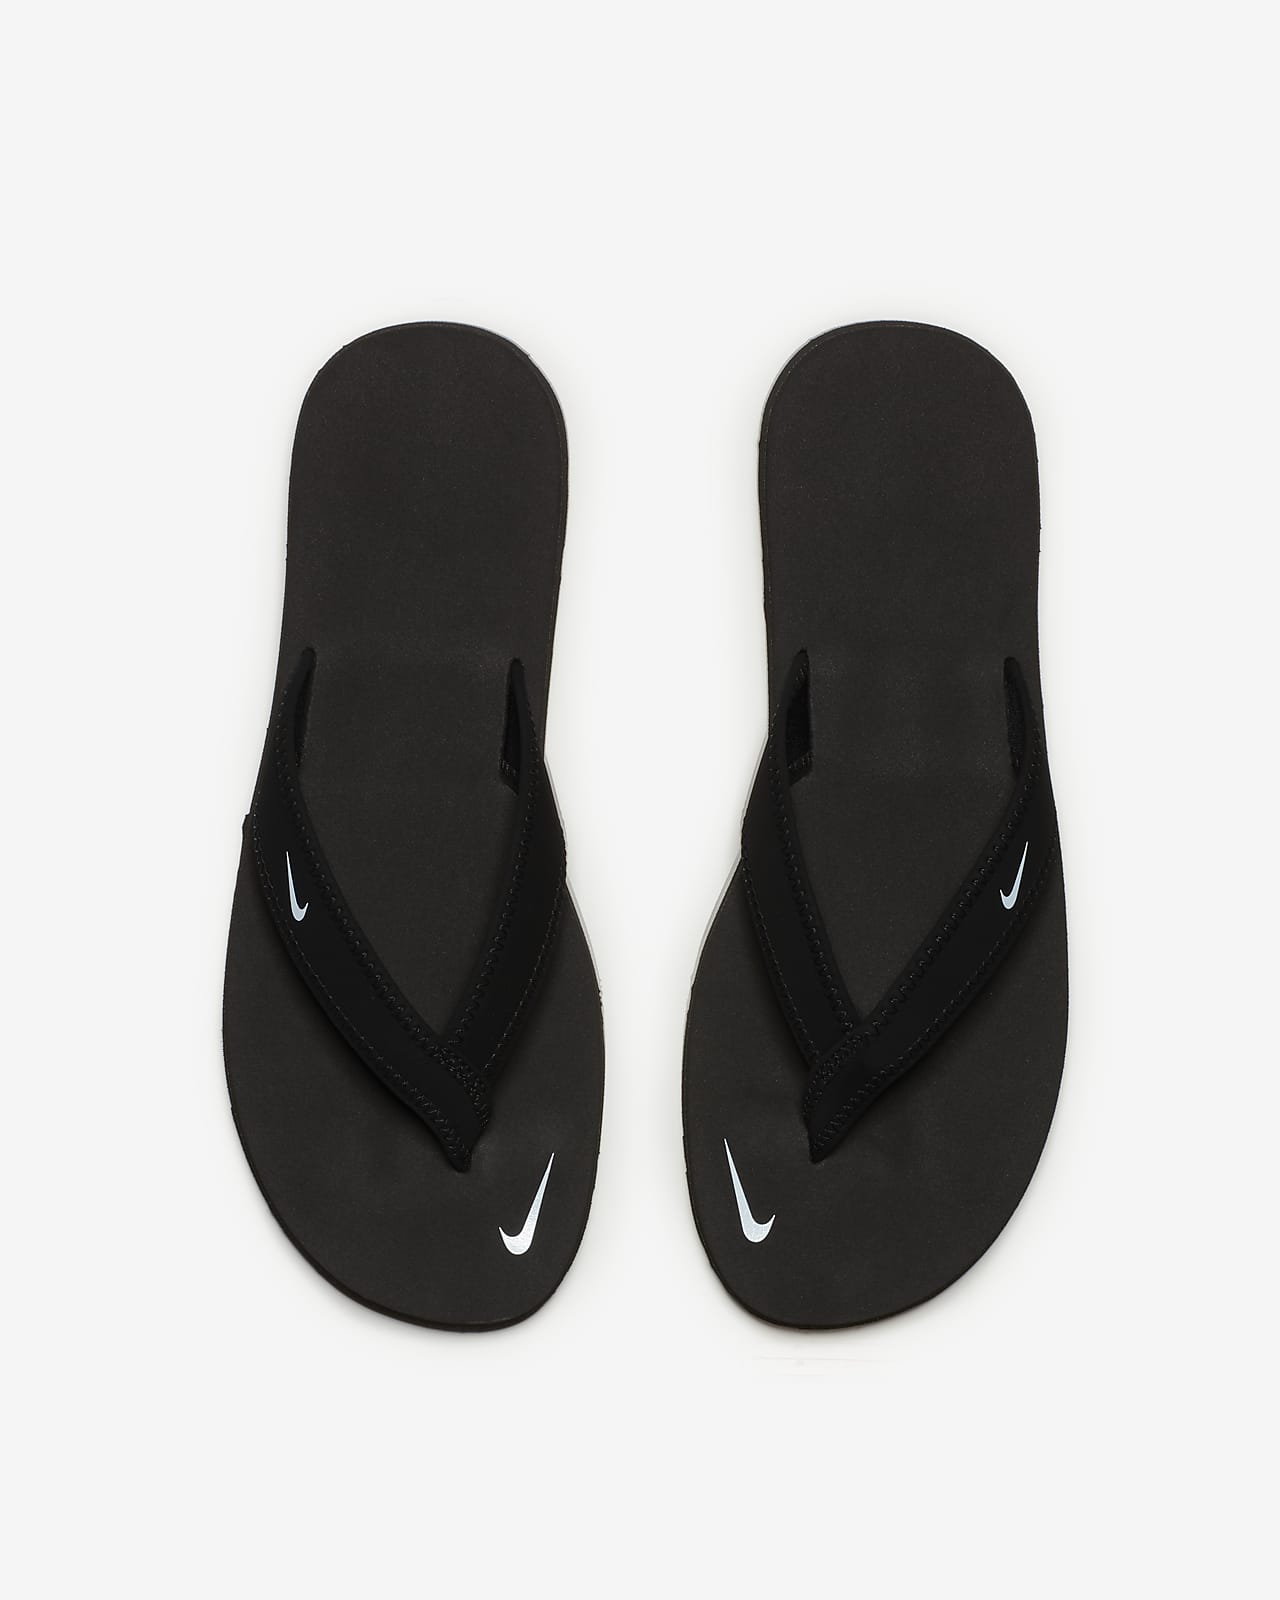 Buy Nike Flip-Flops For Men ( Grey ) Online at Low Prices in India -  Paytmmall.com